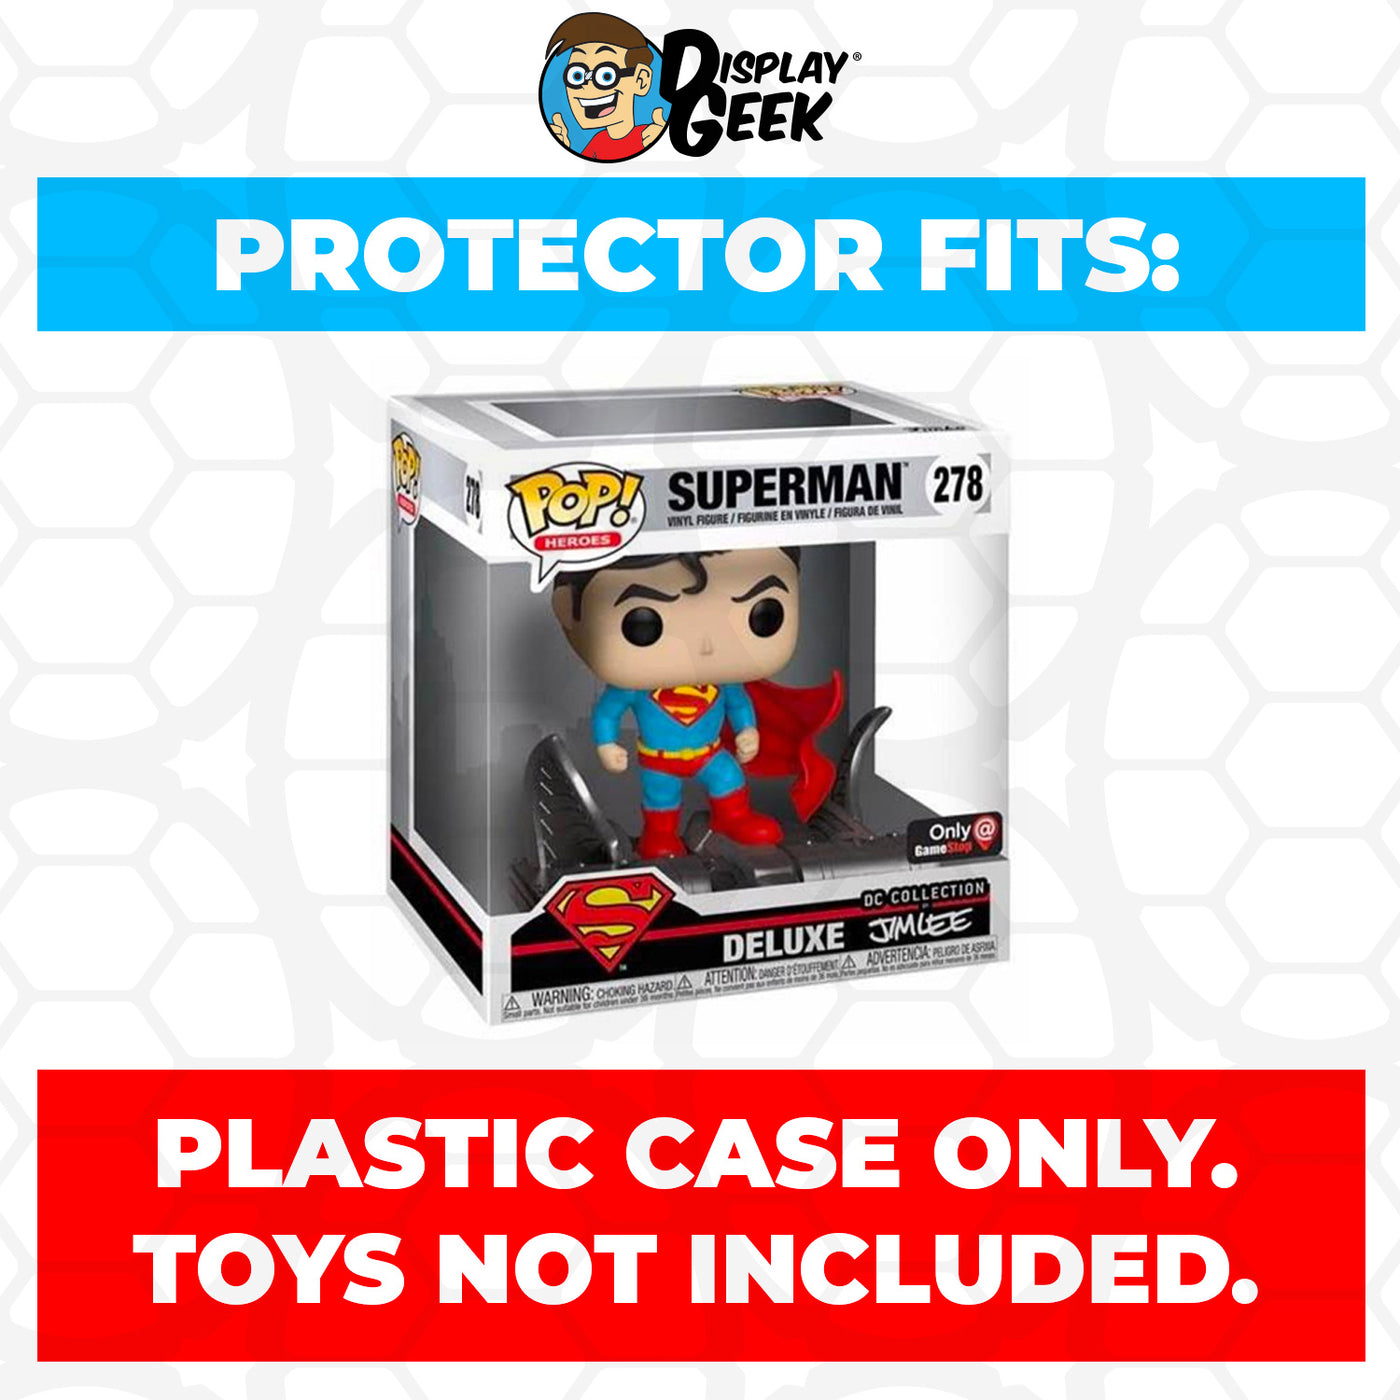 Pop Protector for Superman Jim Lee #278 Funko Pop Deluxe on The Protector Guide App by Display Geek